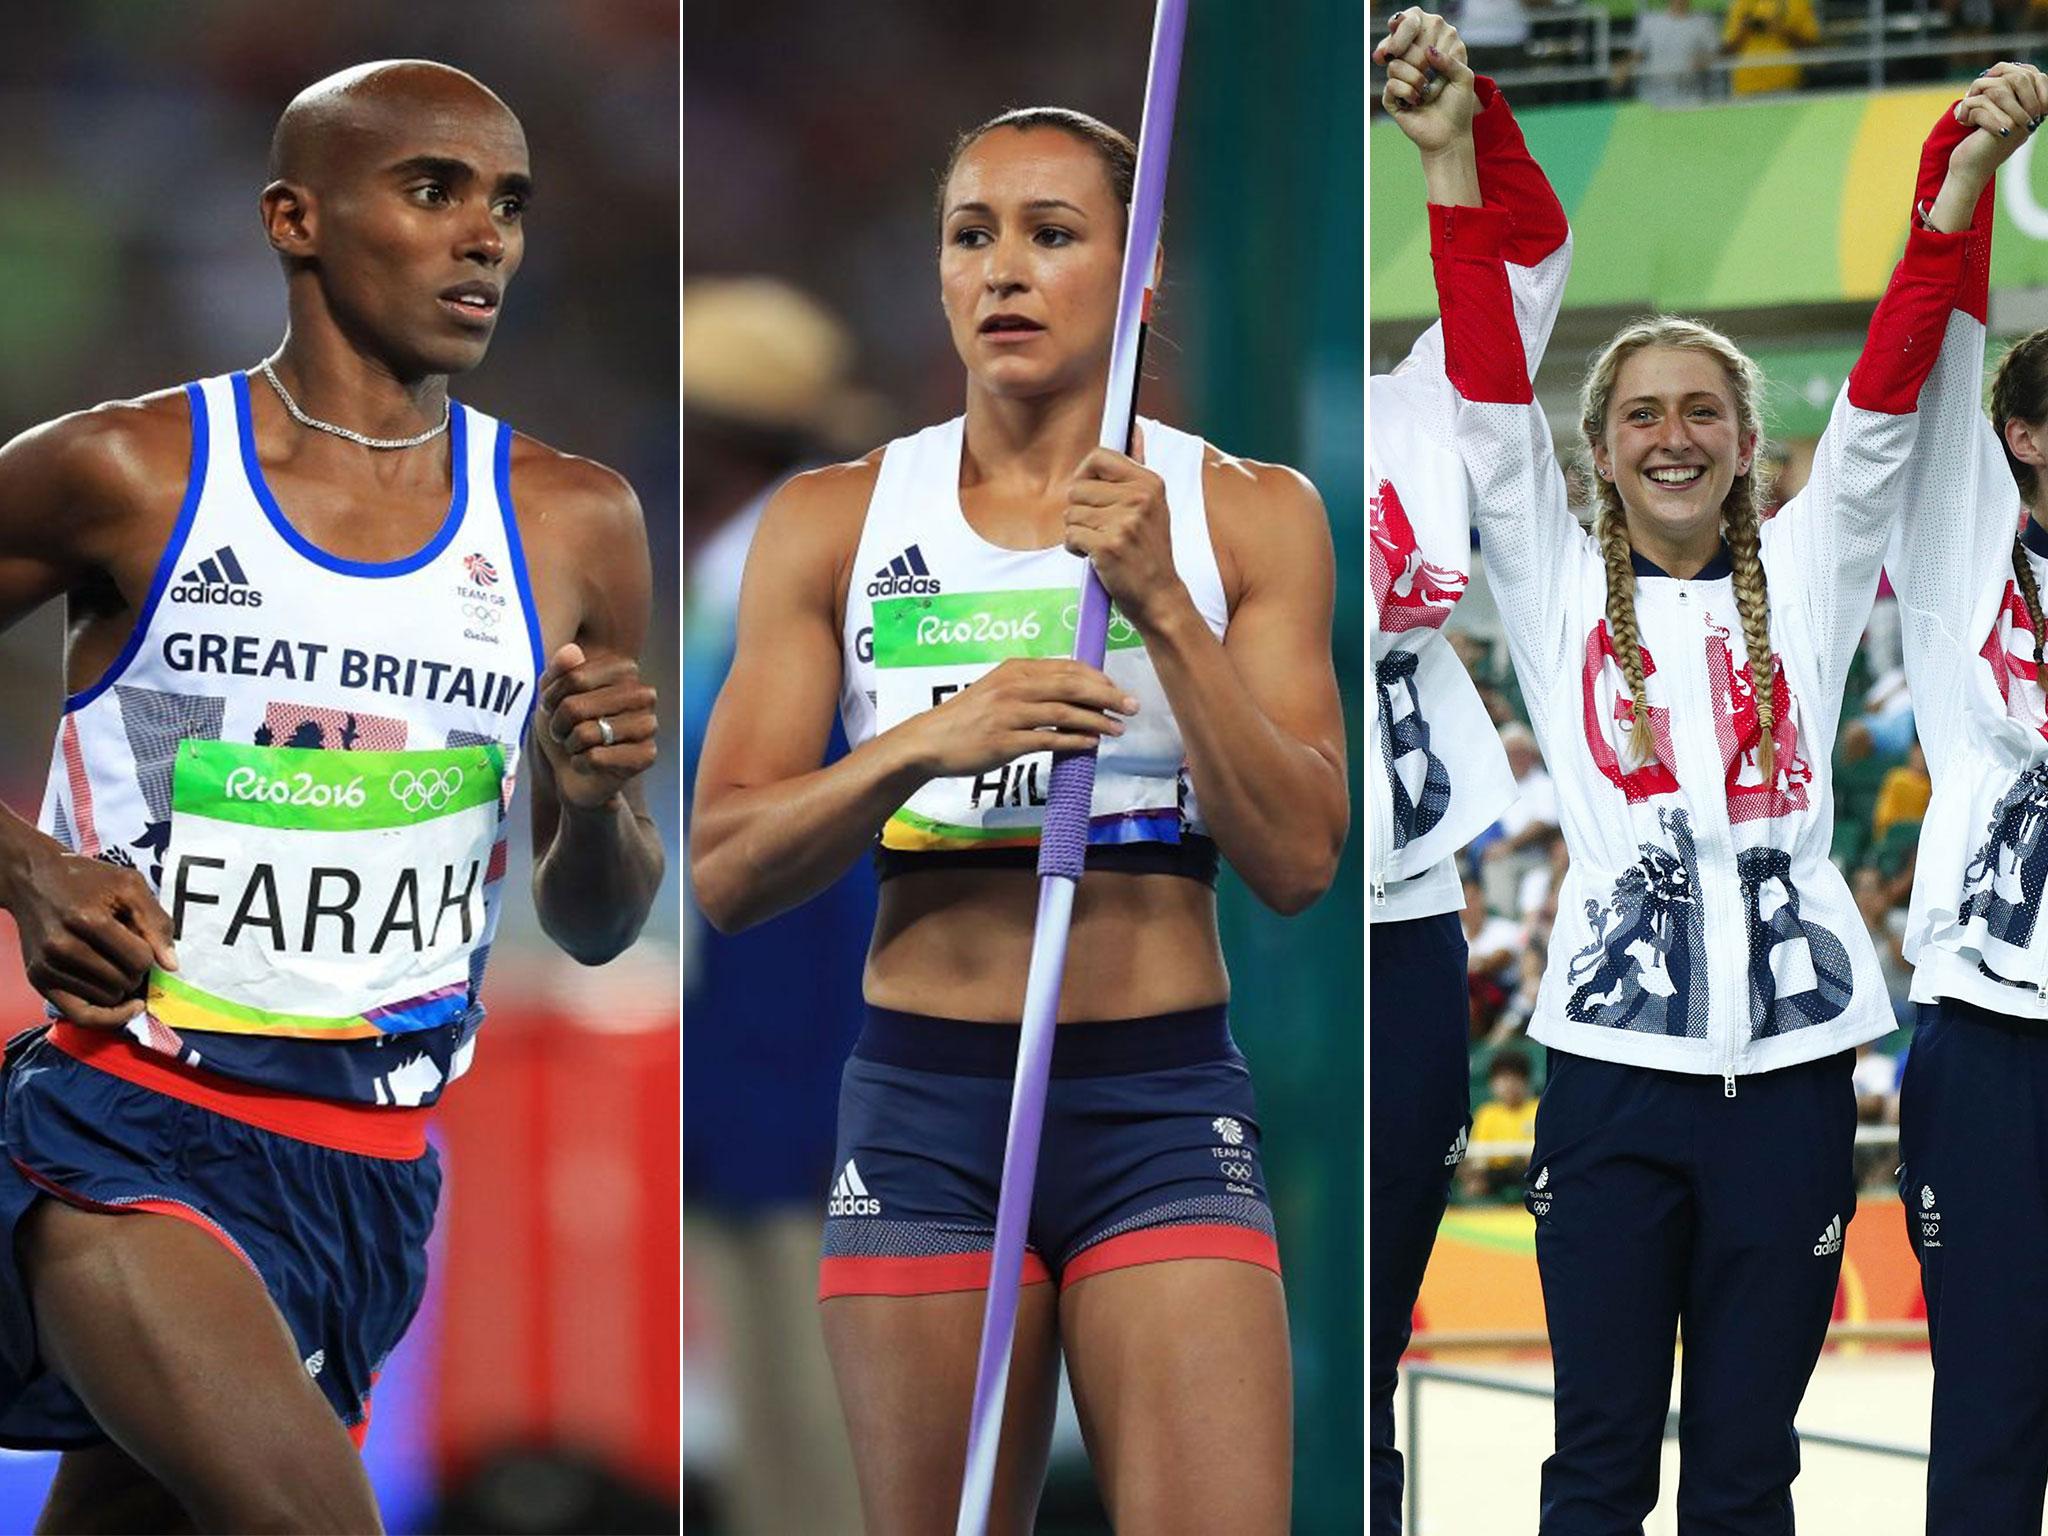 Not all people are celebrating Team GB's gold medals